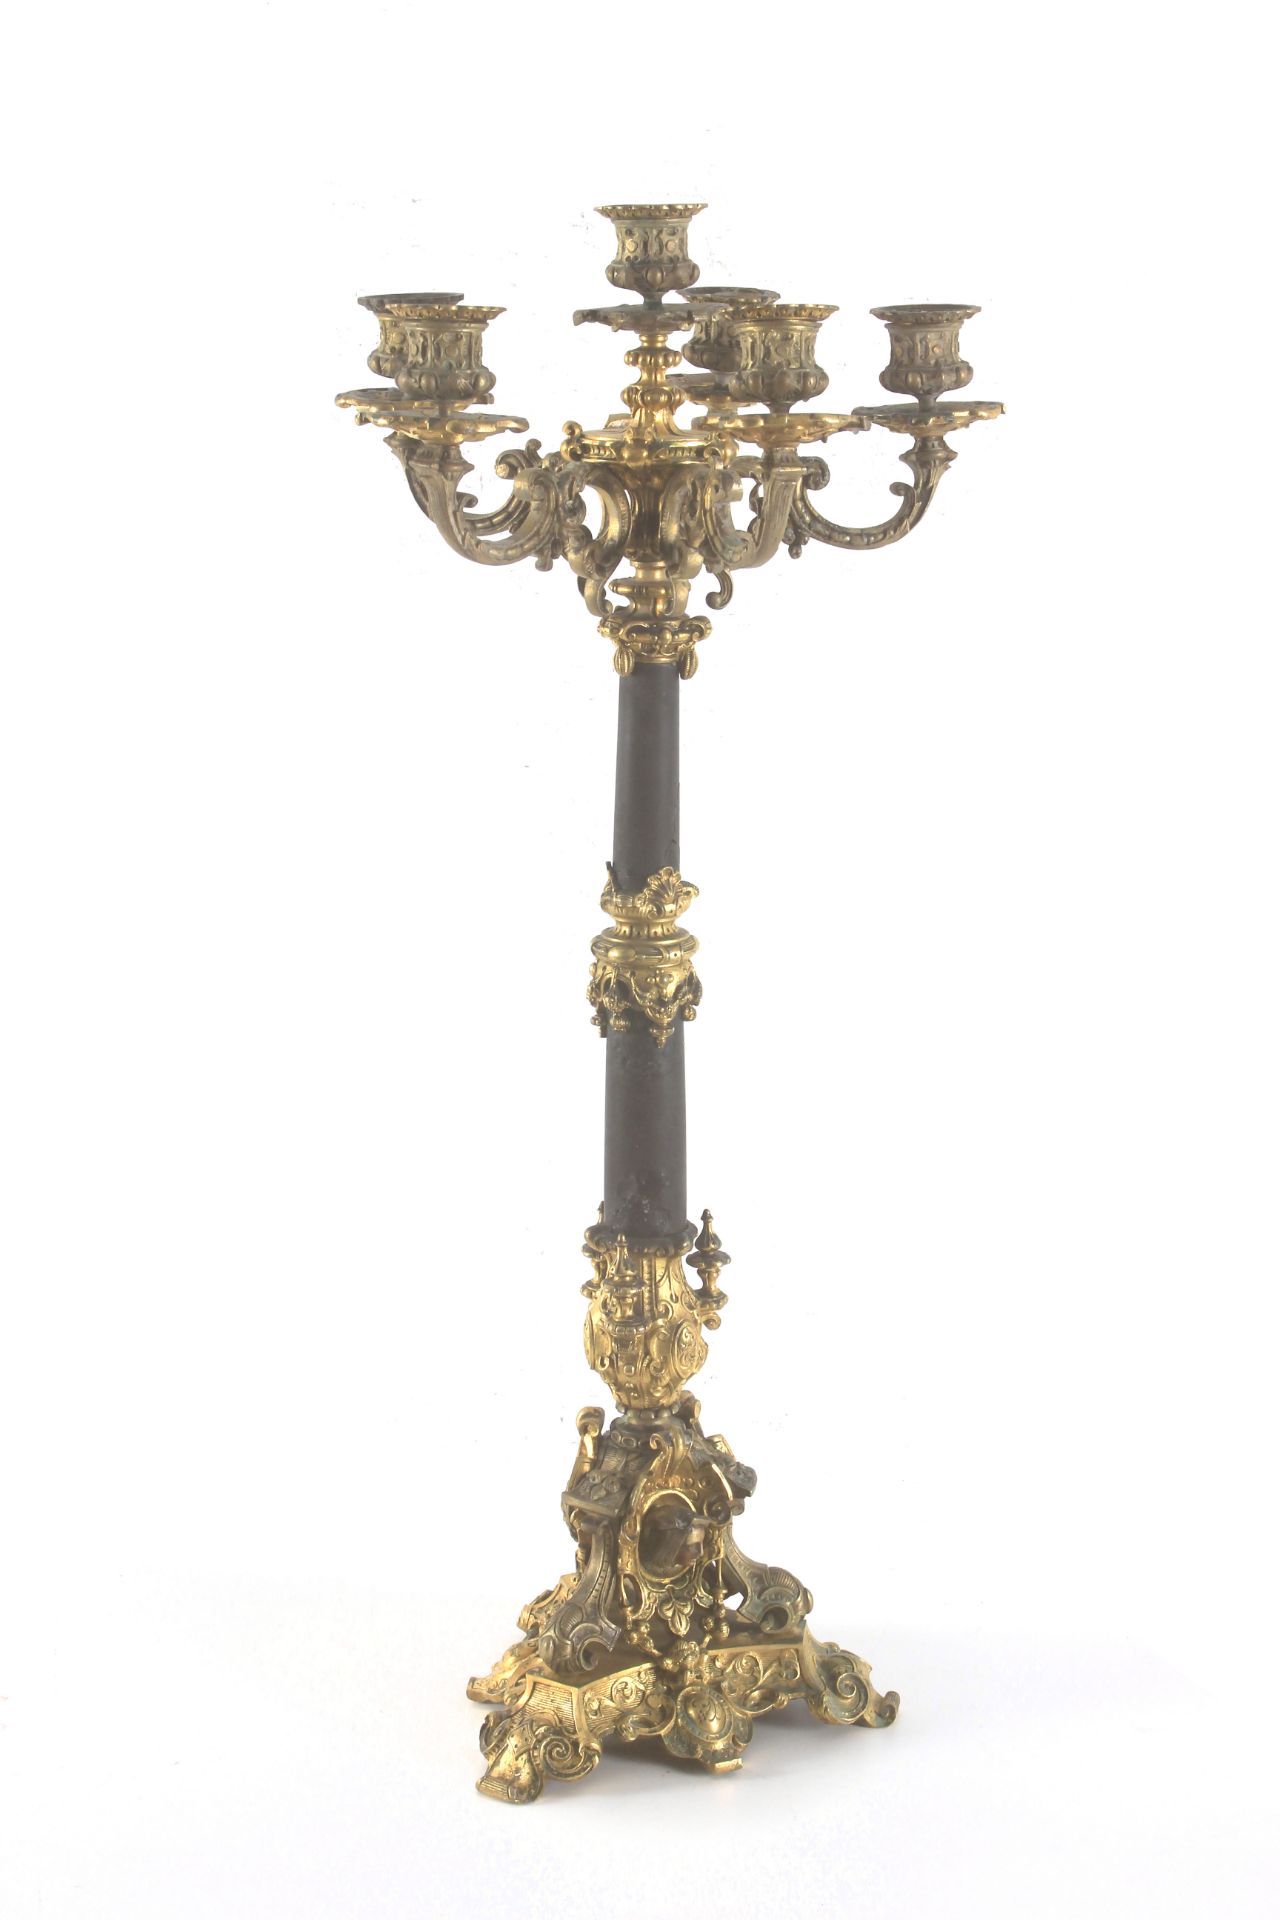 A 19th century Louis XV style French six light candelabrum - Image 2 of 8